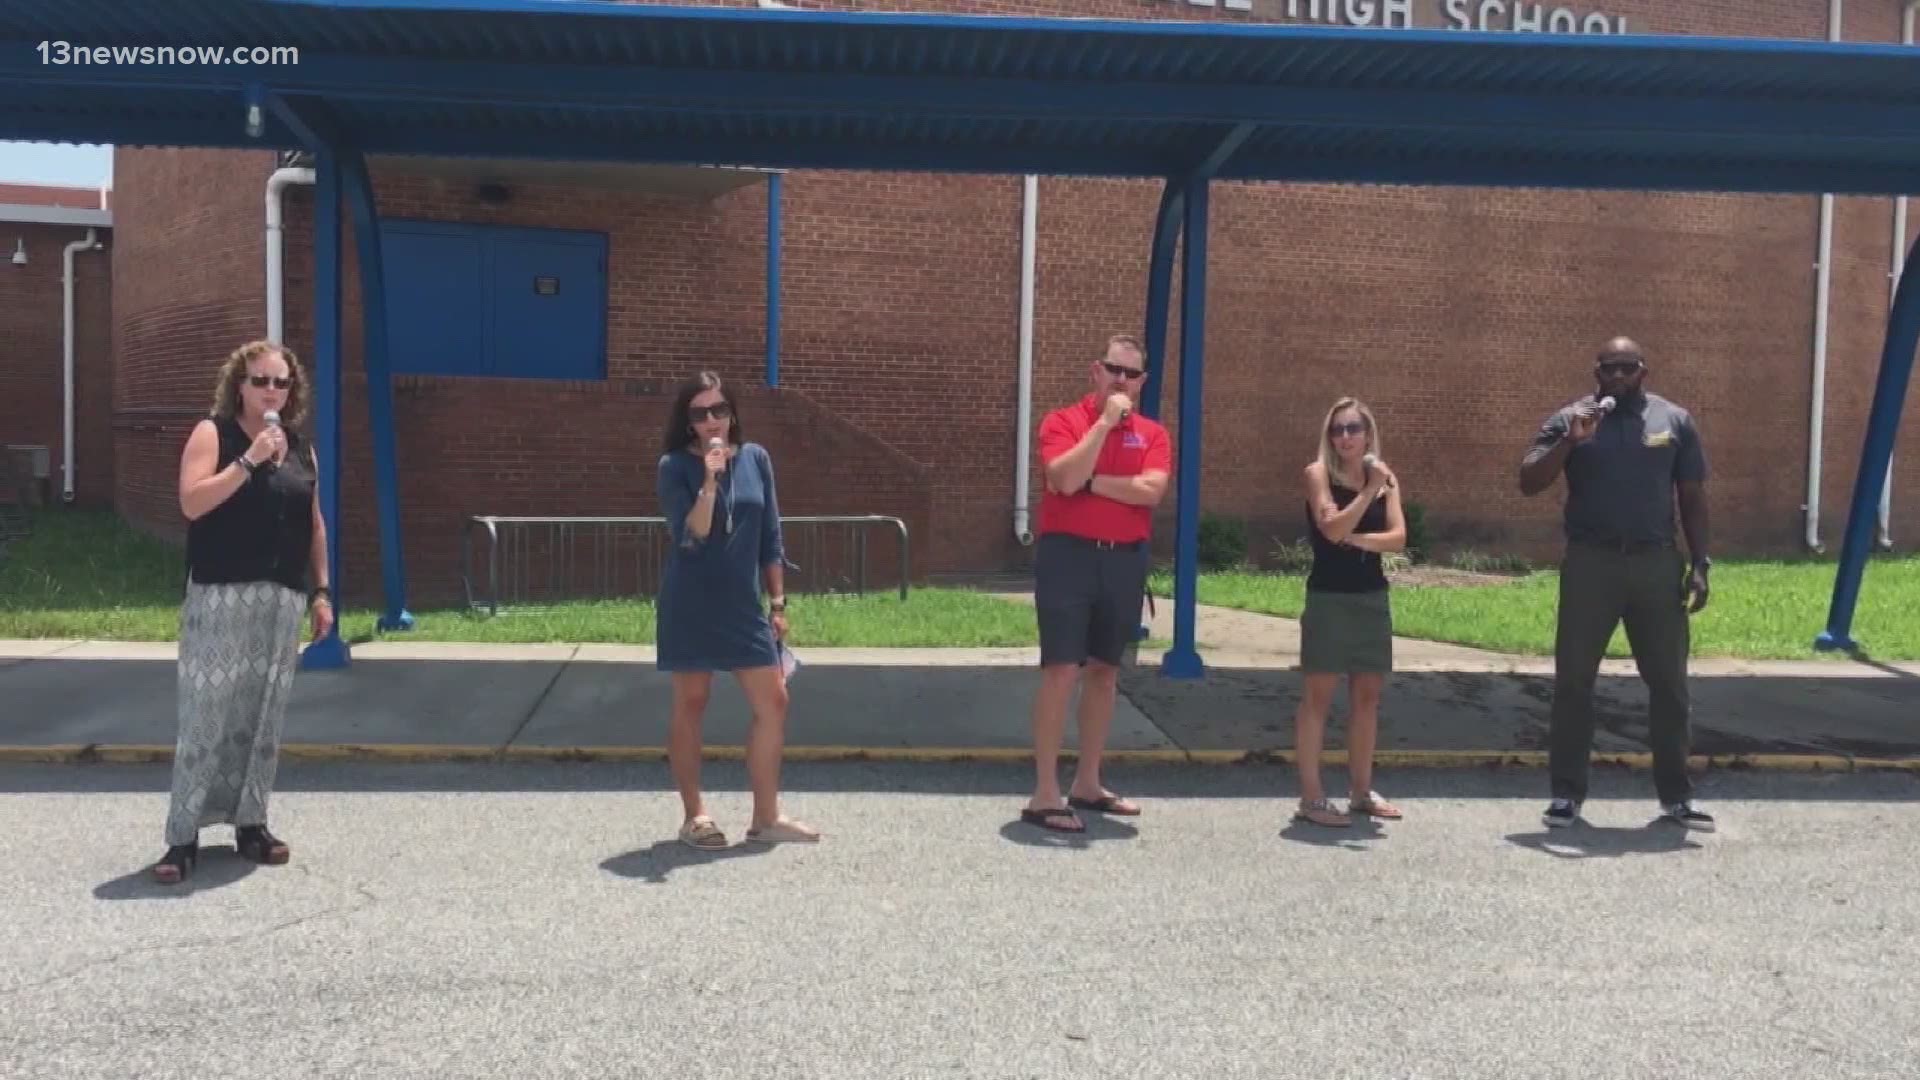 13News Now Photojournalist Adrian Guerra spoke with students and faculty who got involved in a rap song and video to boost morale for the upcoming school year.